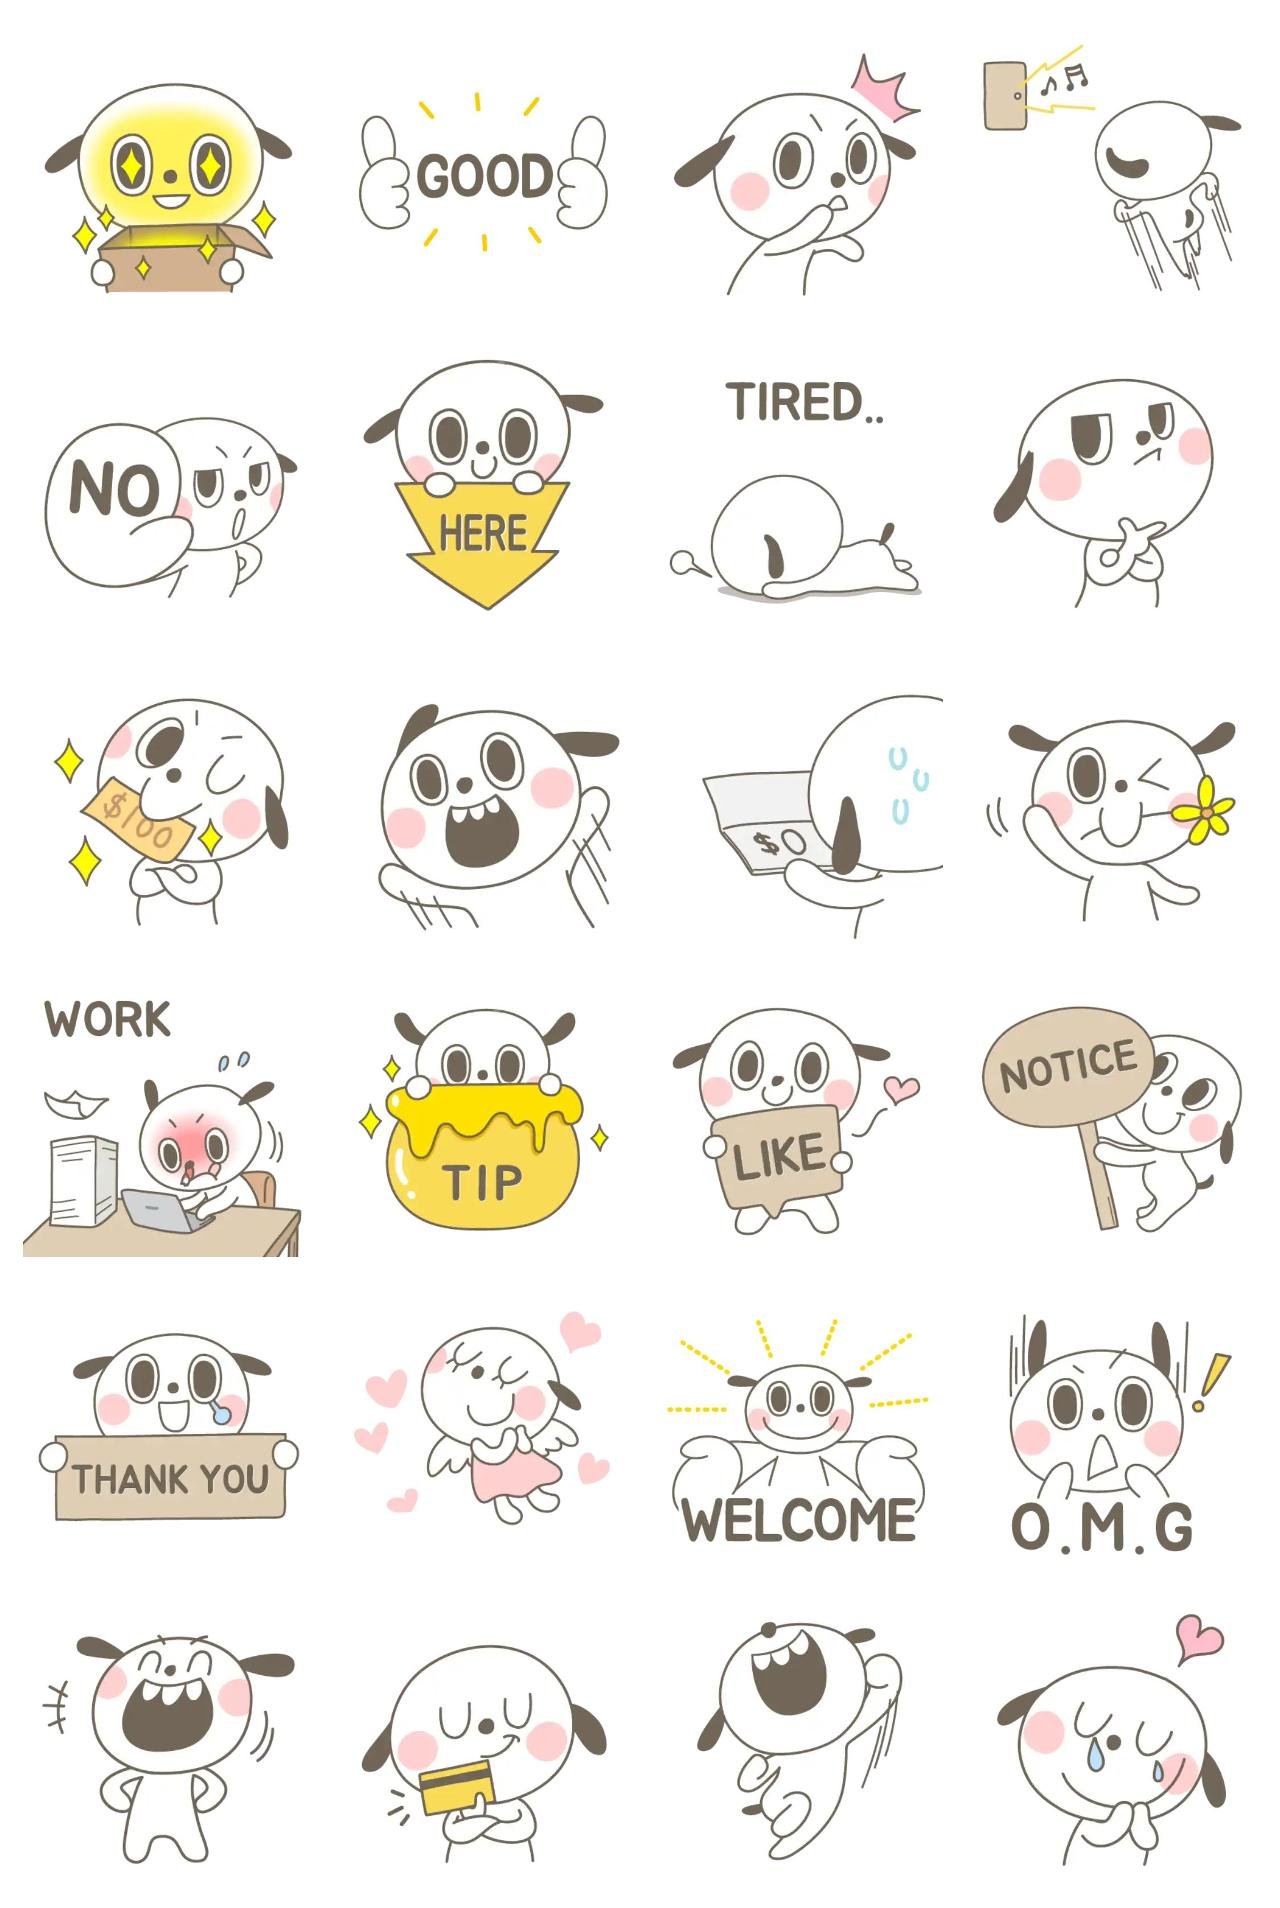 mong_i Animals,Gag sticker pack for Whatsapp, Telegram, Signal, and others chatting and message apps